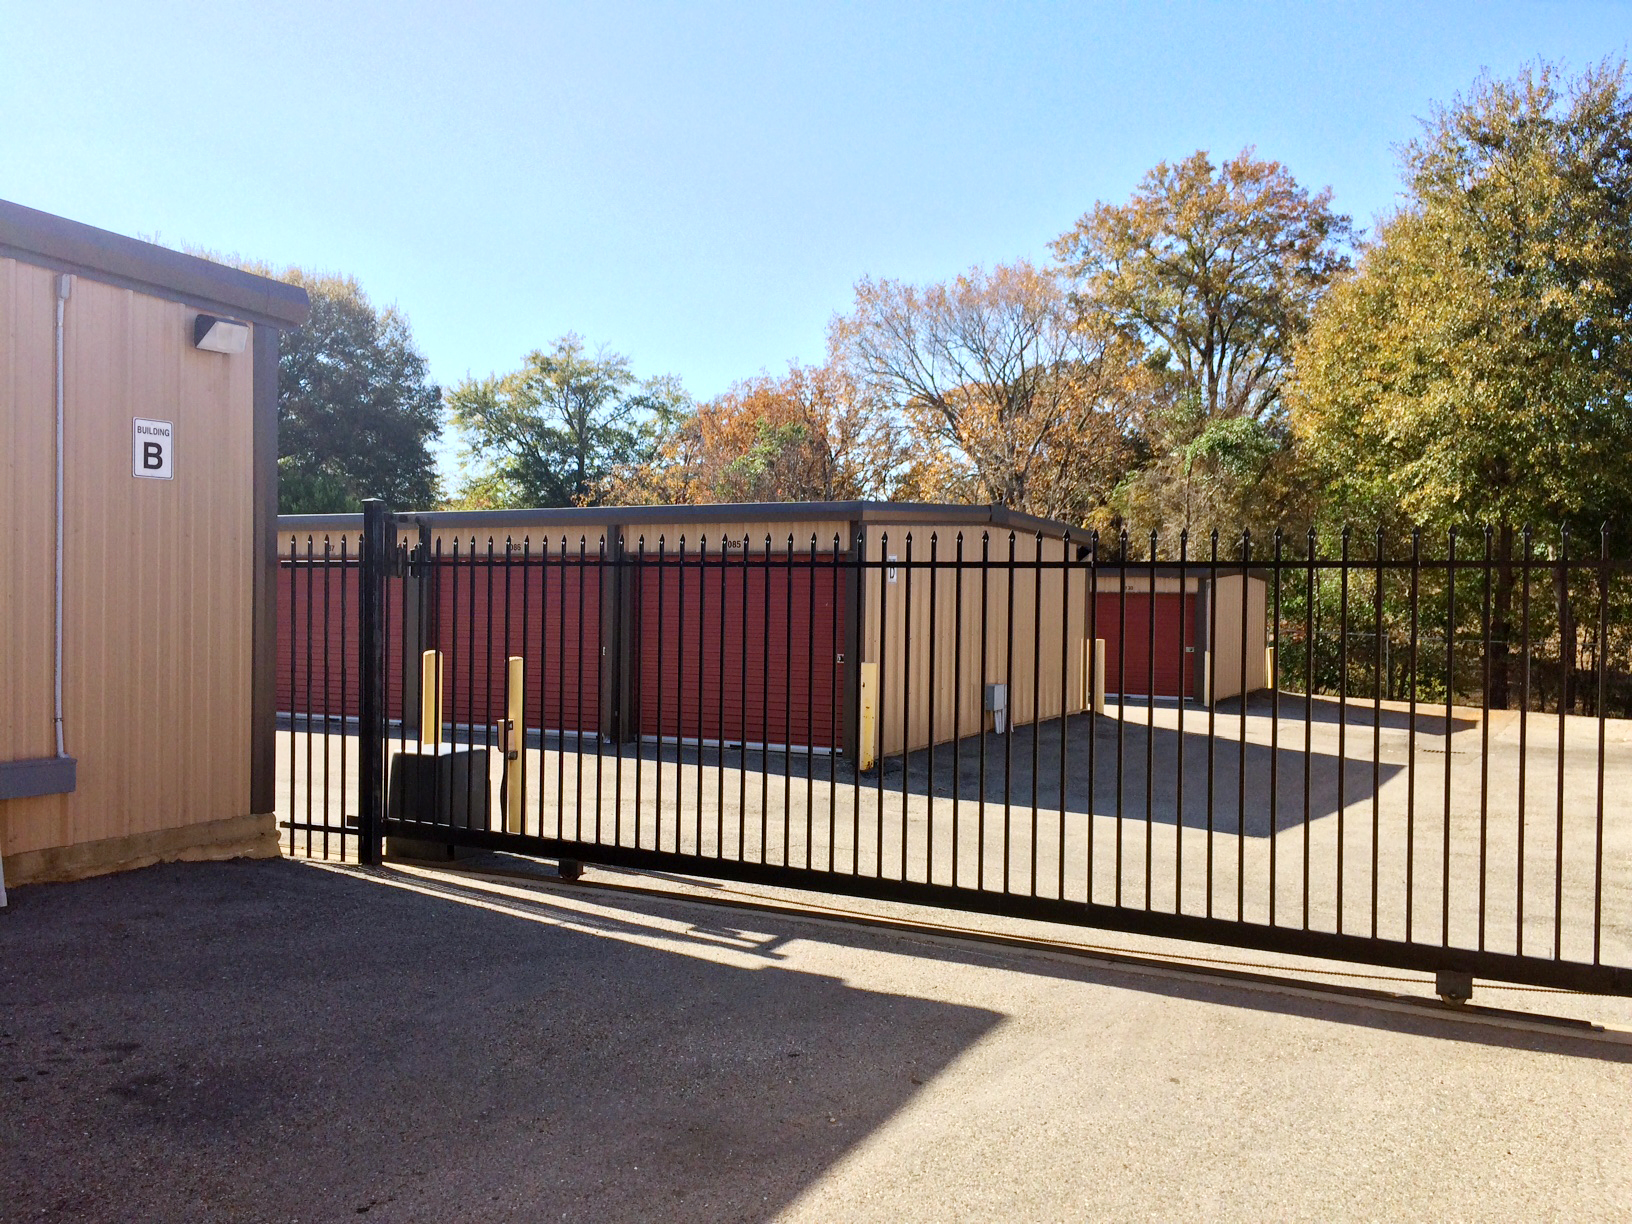 Mission Storage FM16 West location gate and outdoor units